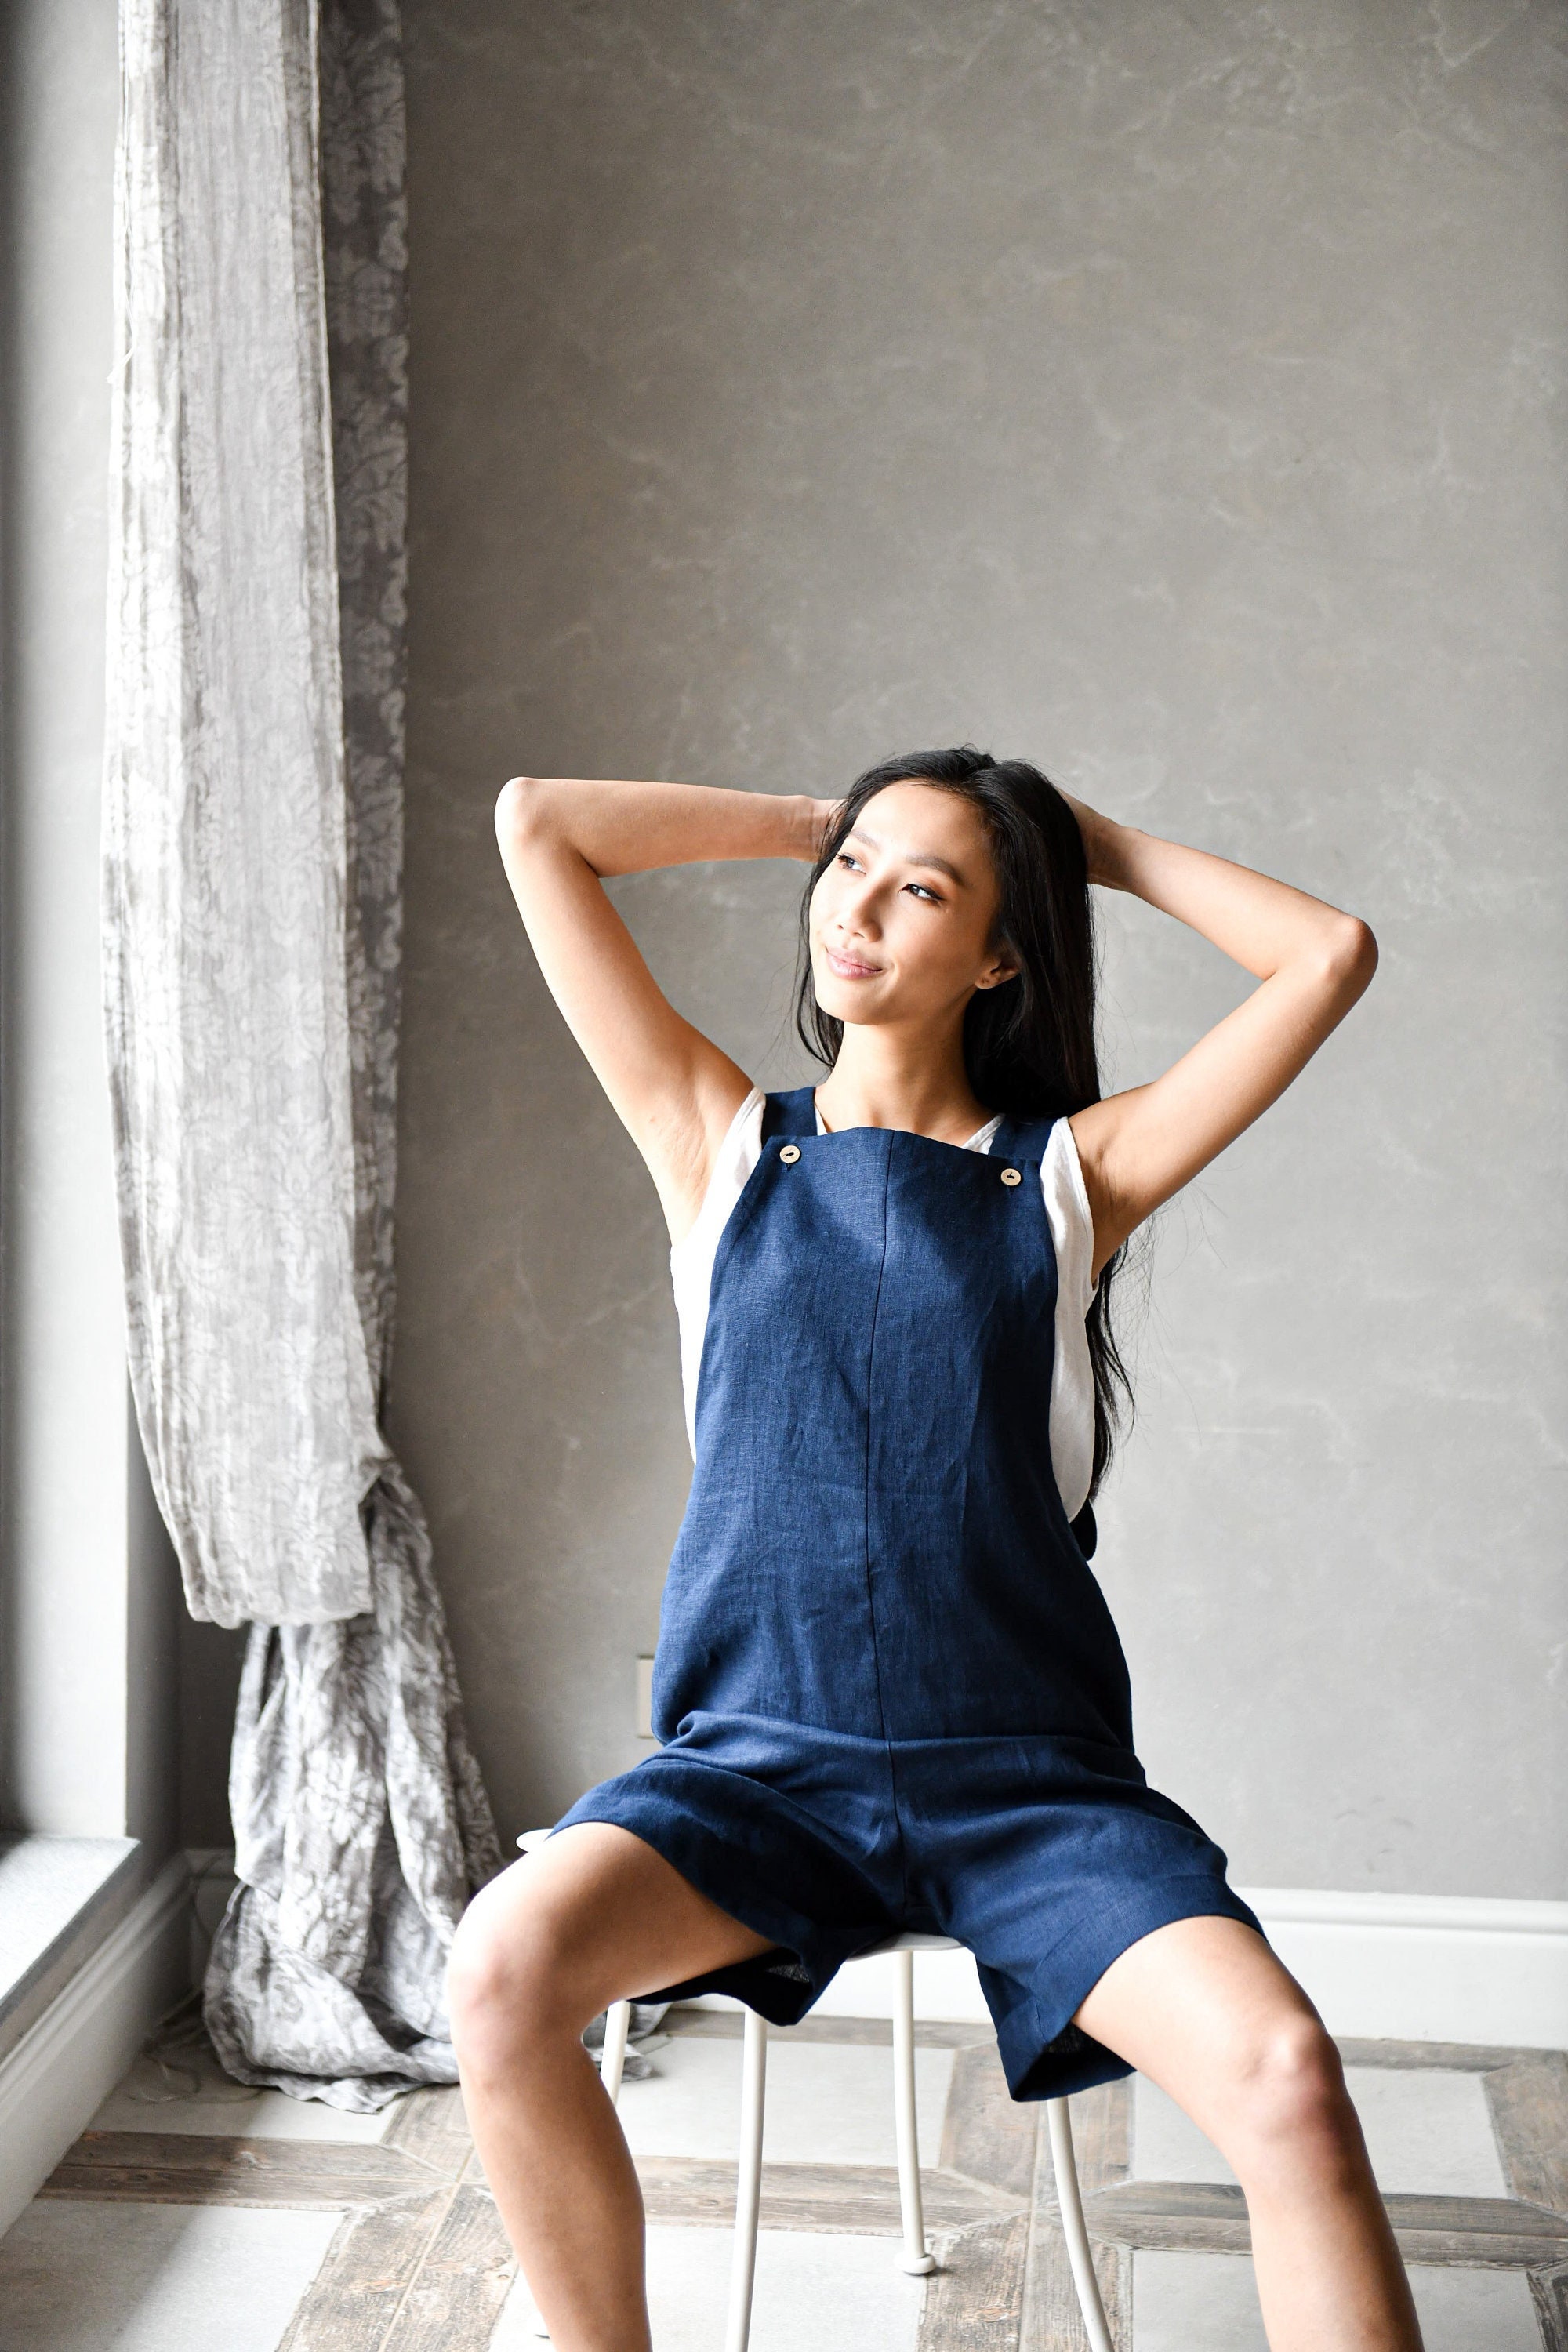 Dungarees for Women - Upto 50% to 80% OFF on Women Dungarees